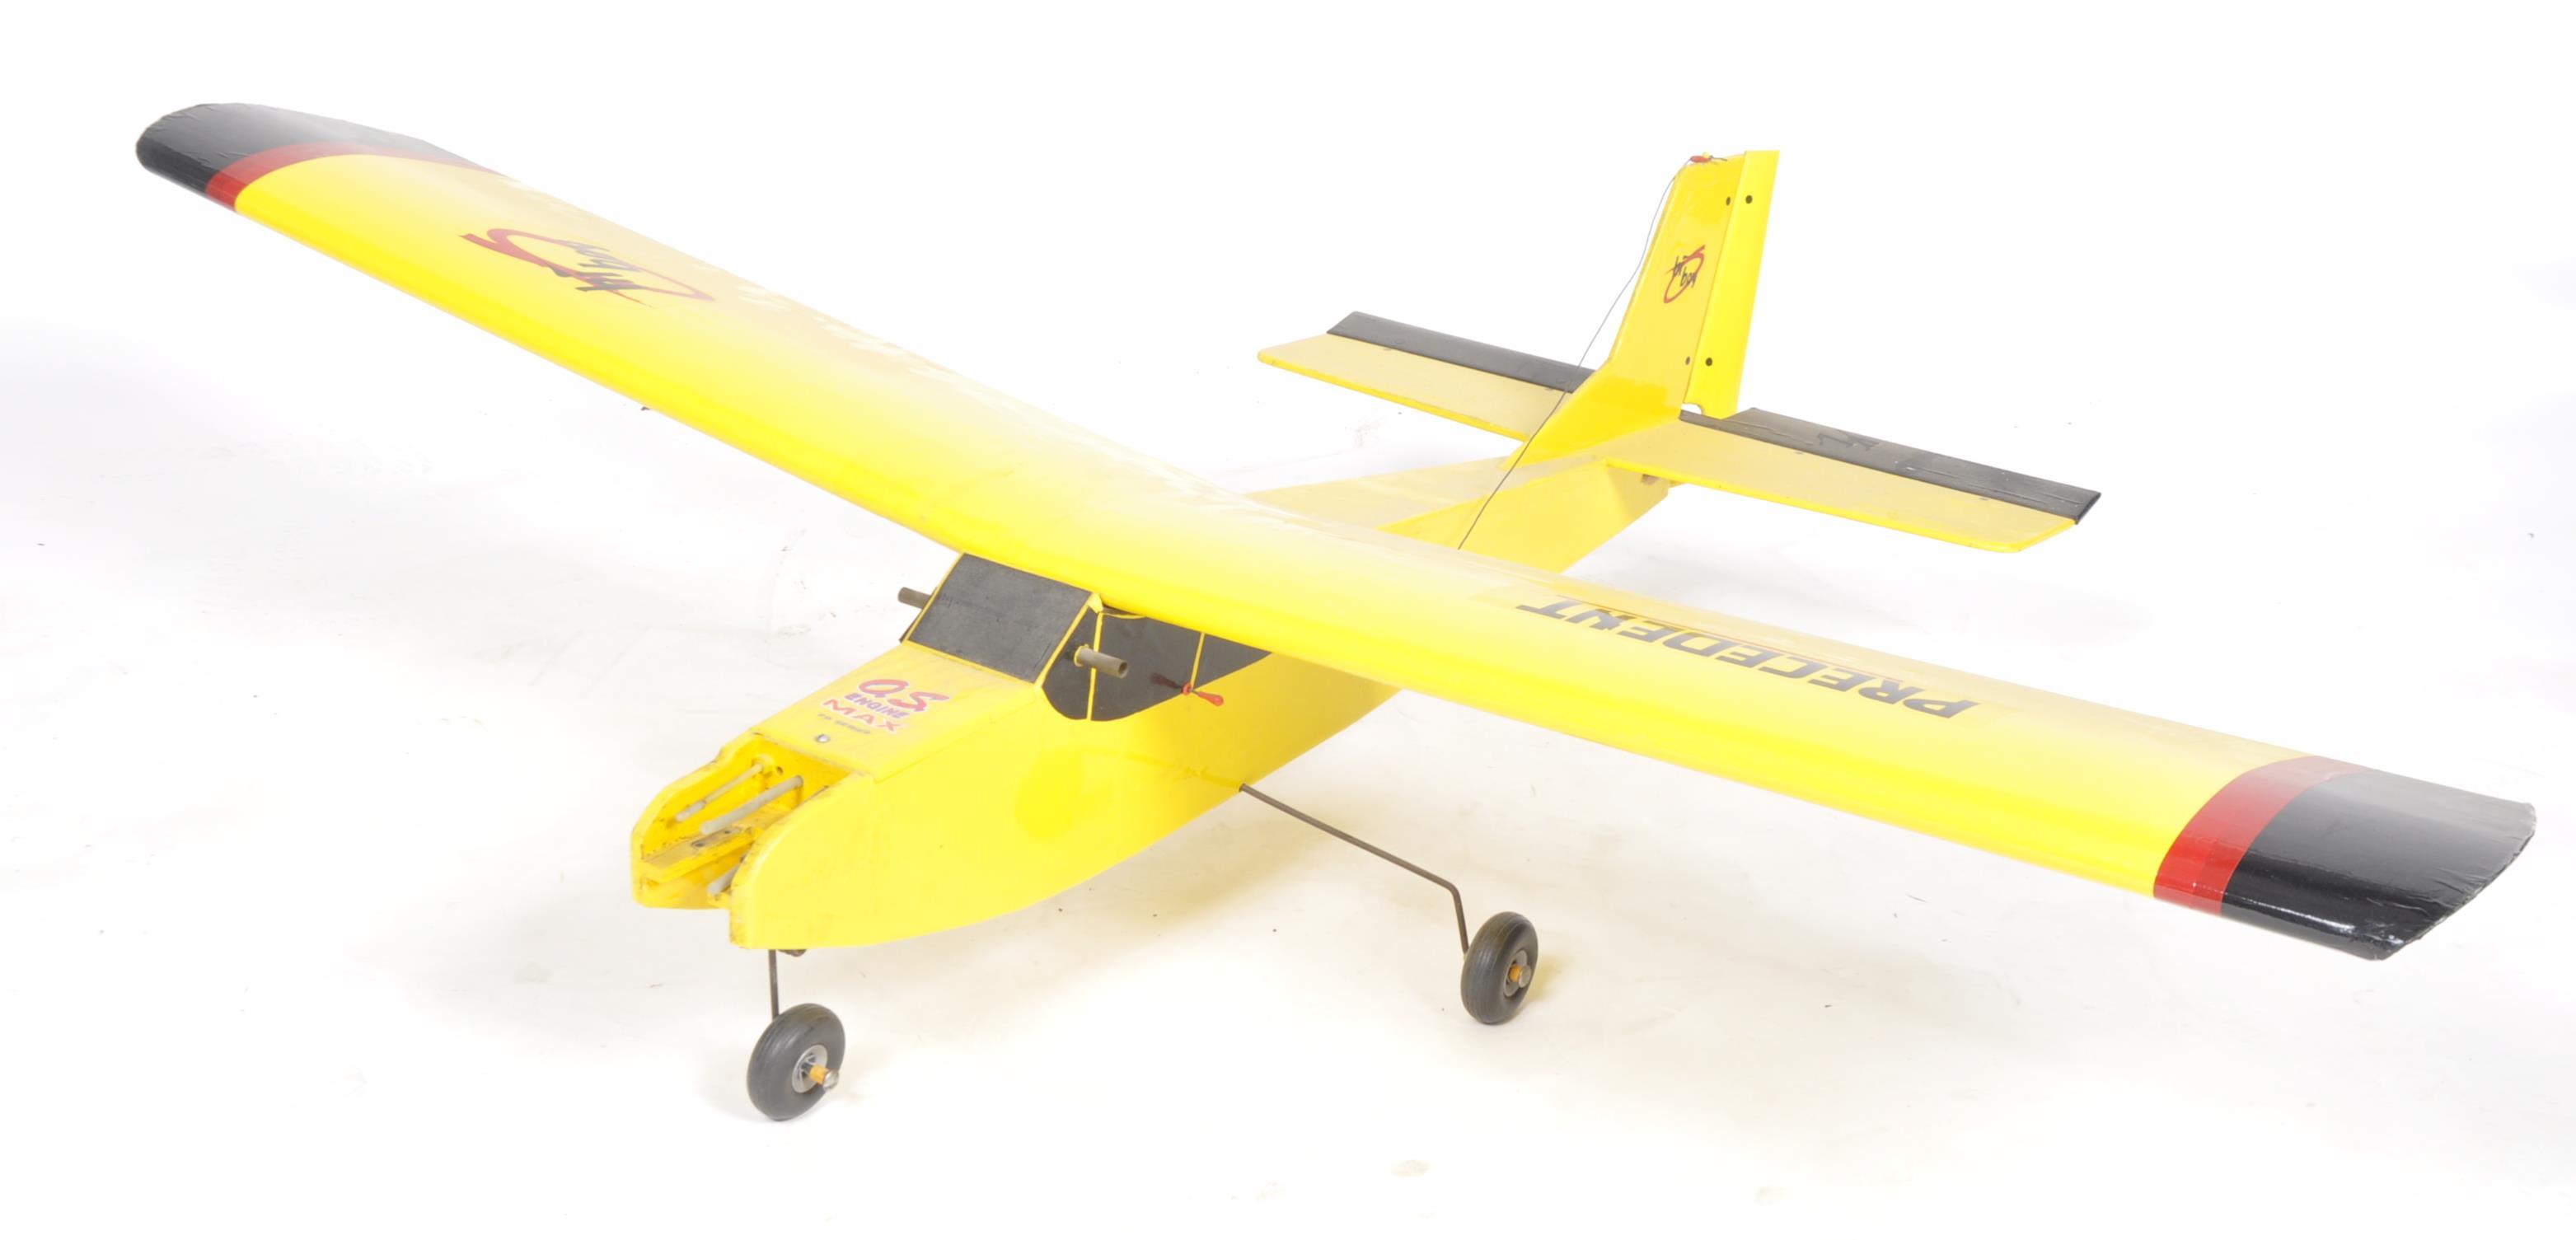 LARGE SCALE RC RADIO CONTROLLED MODEL PLANE